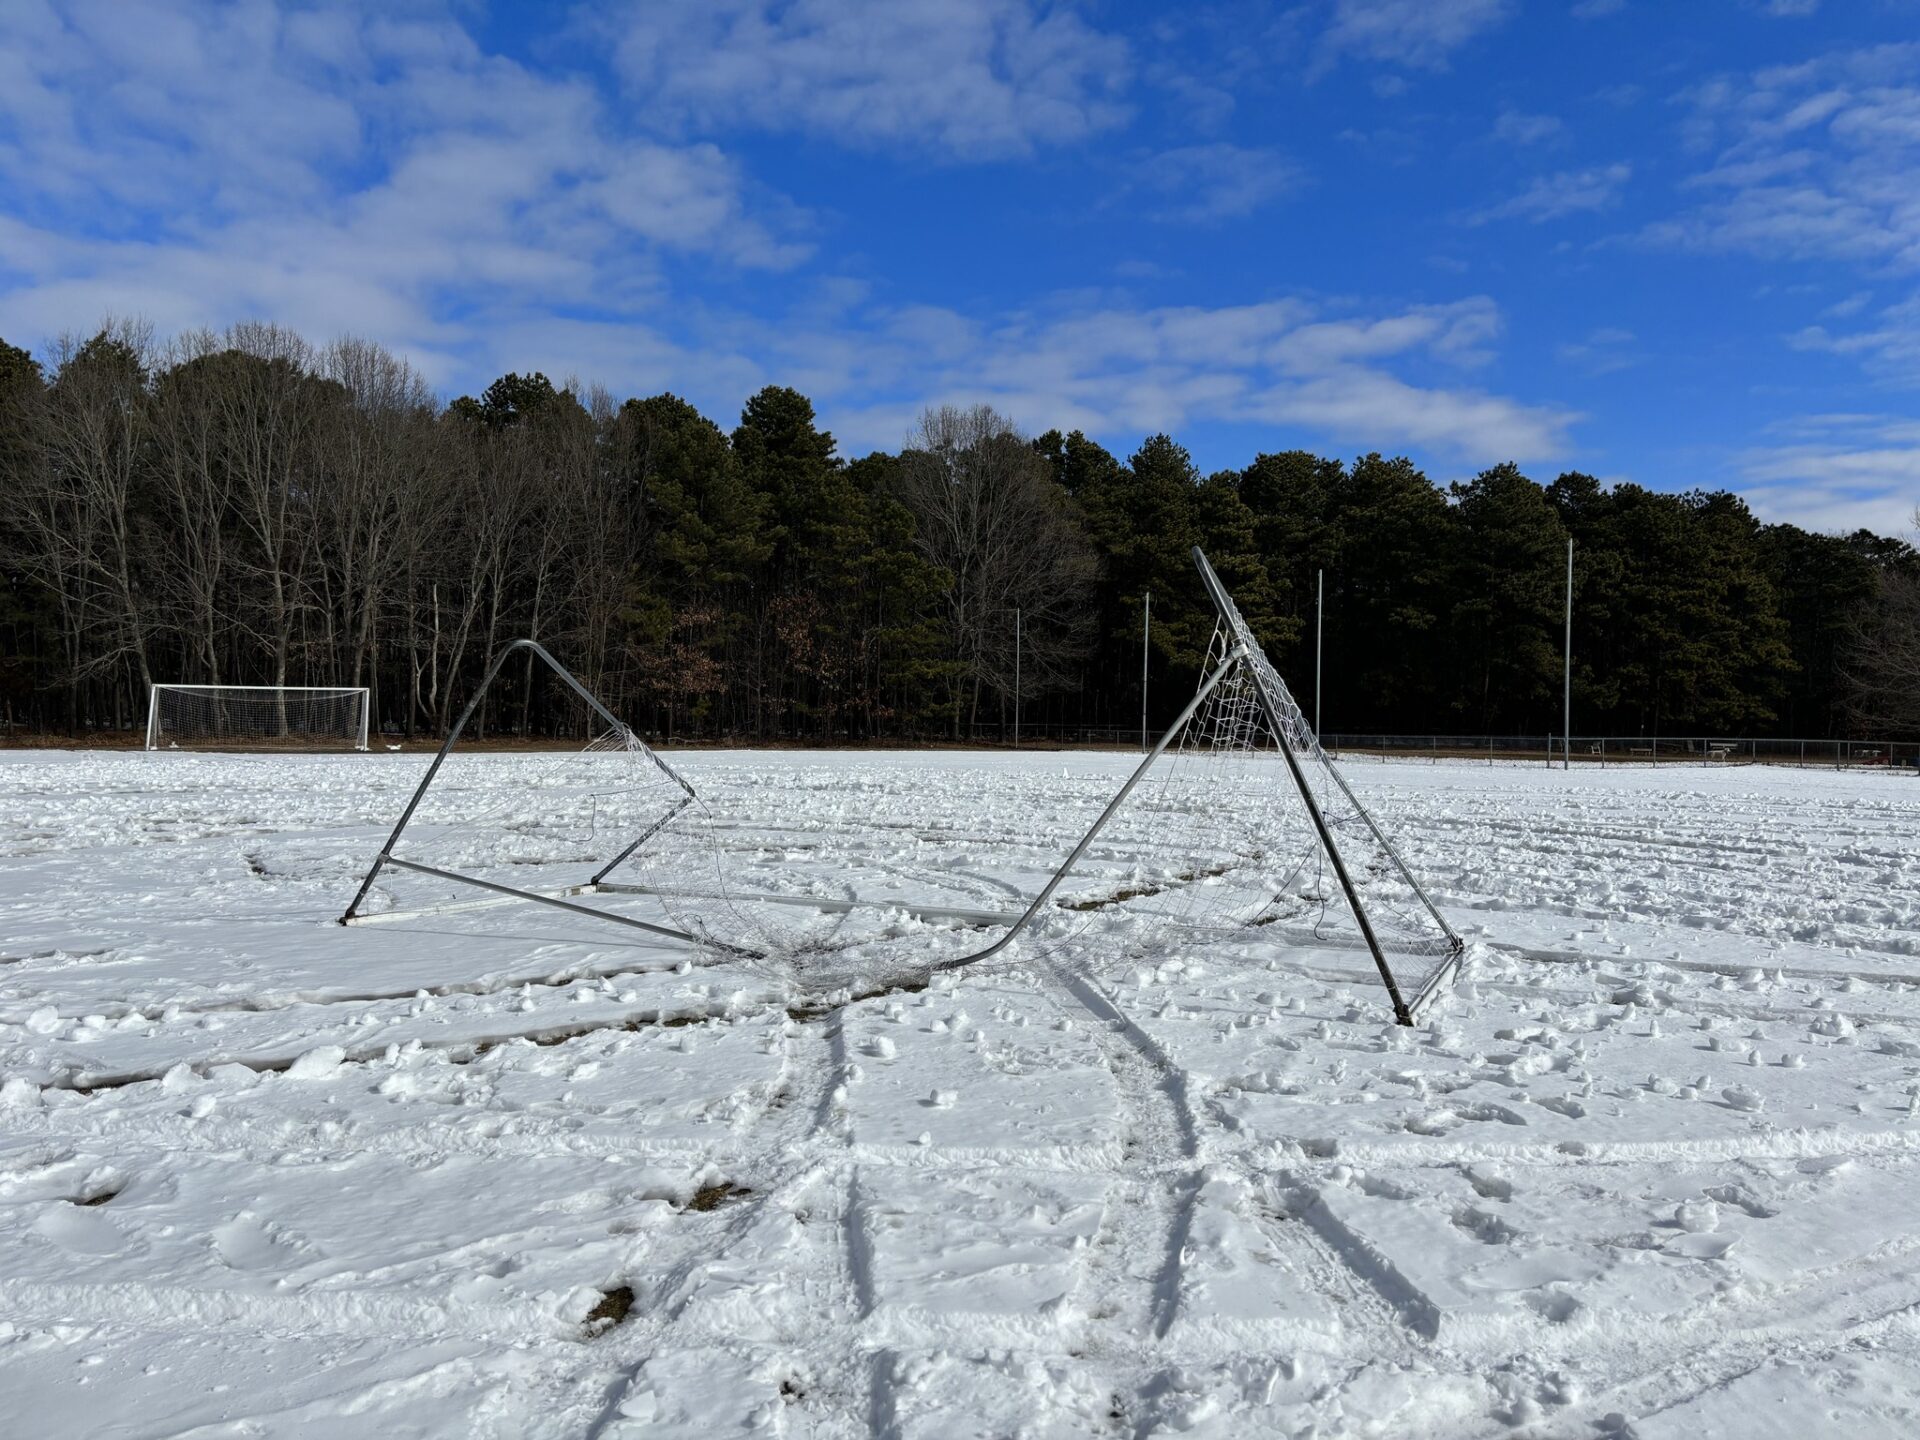 [CREDIT: WPD] Warwick Police are asking the public's help locating a Warwick City Park vandal who drove through several wood fences and destroyed a soccer net with a vehicle Tuesday night.